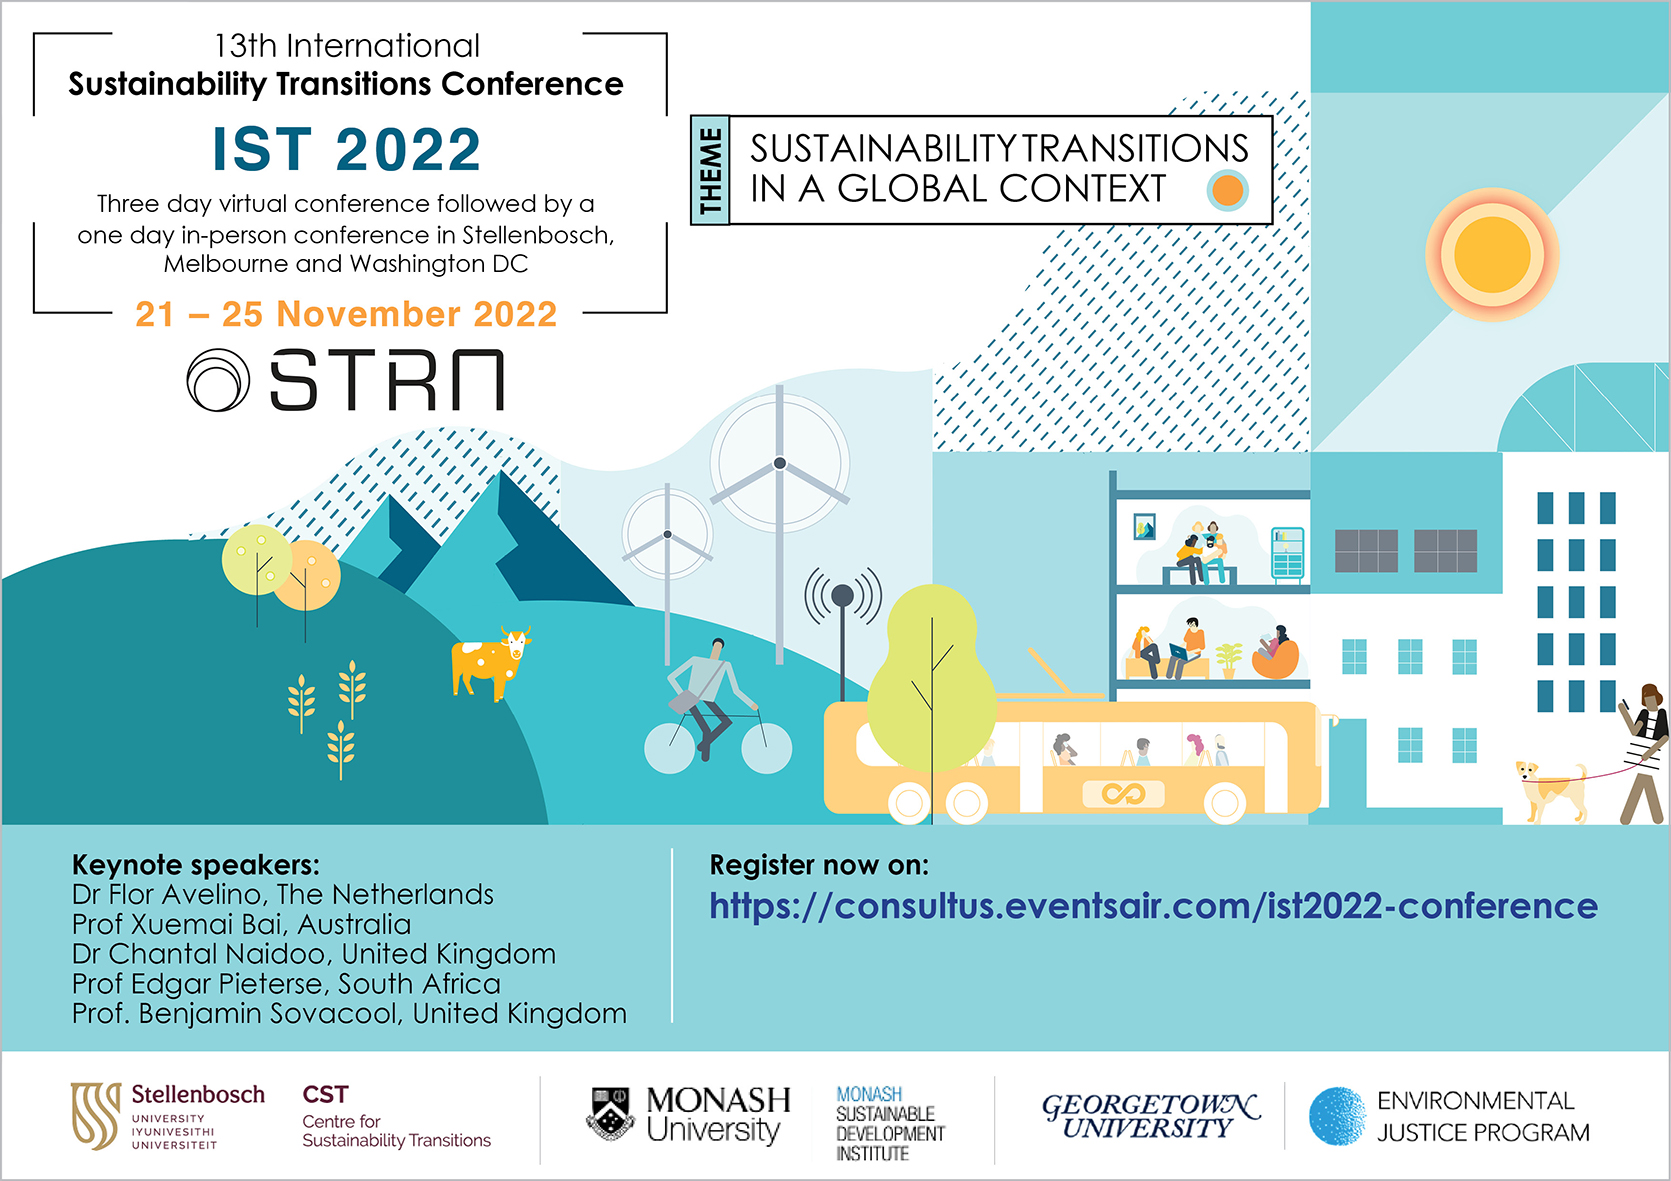 13th International Sustainability Transitions Conference (IST